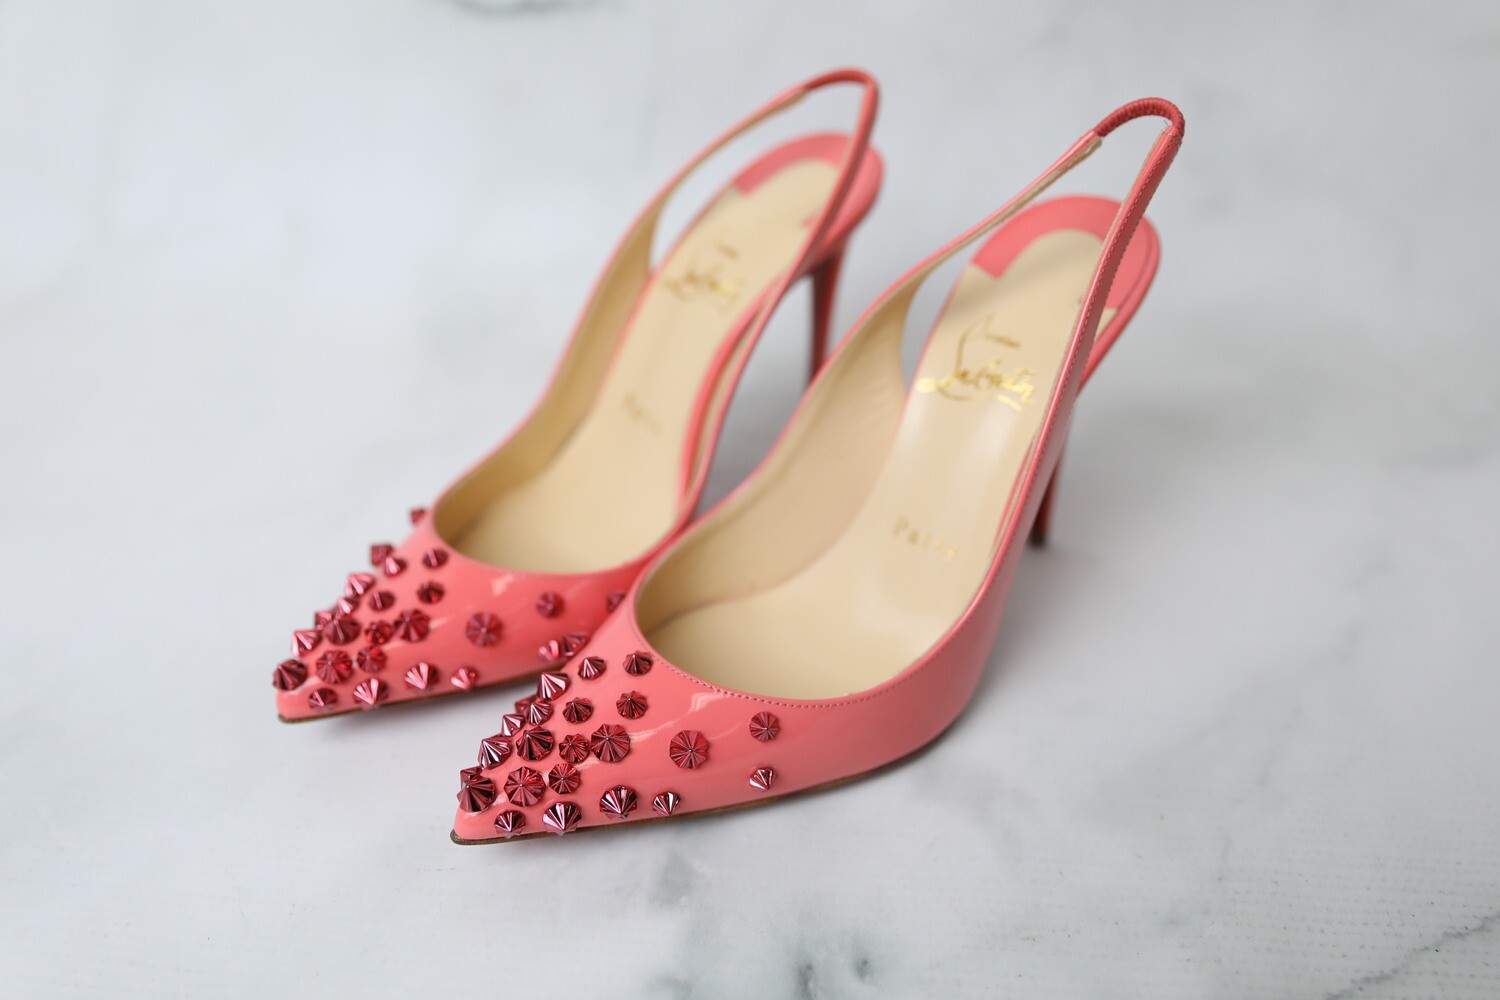 Christian Louboutin, Shoes, Real Christian Louboutin Heels With Spikes